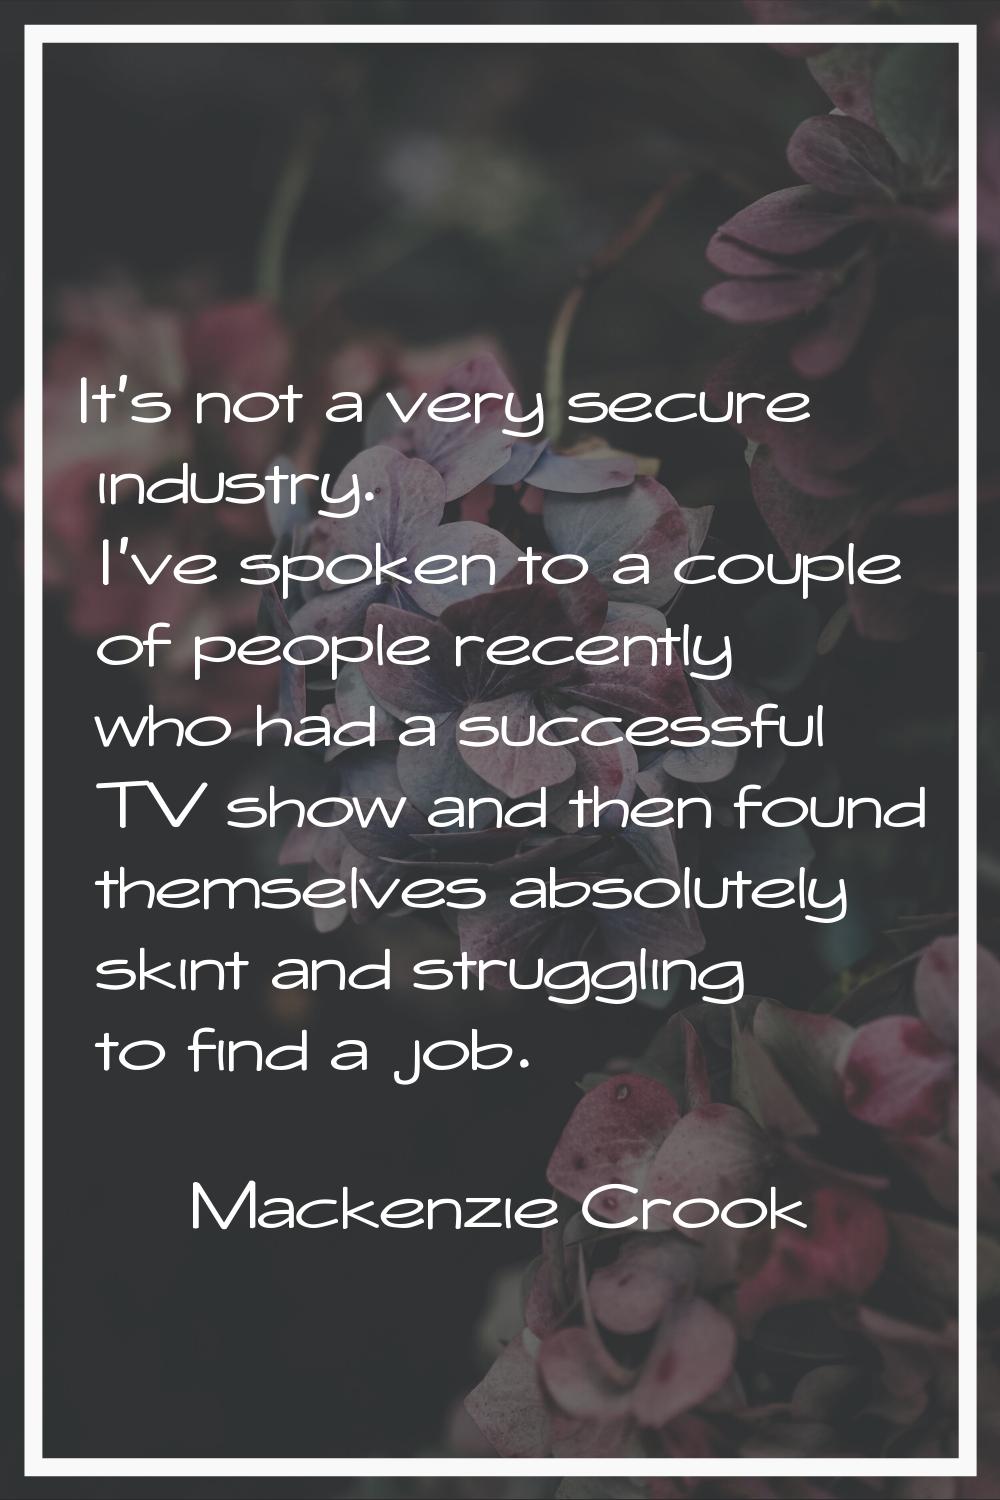 It's not a very secure industry. I've spoken to a couple of people recently who had a successful TV